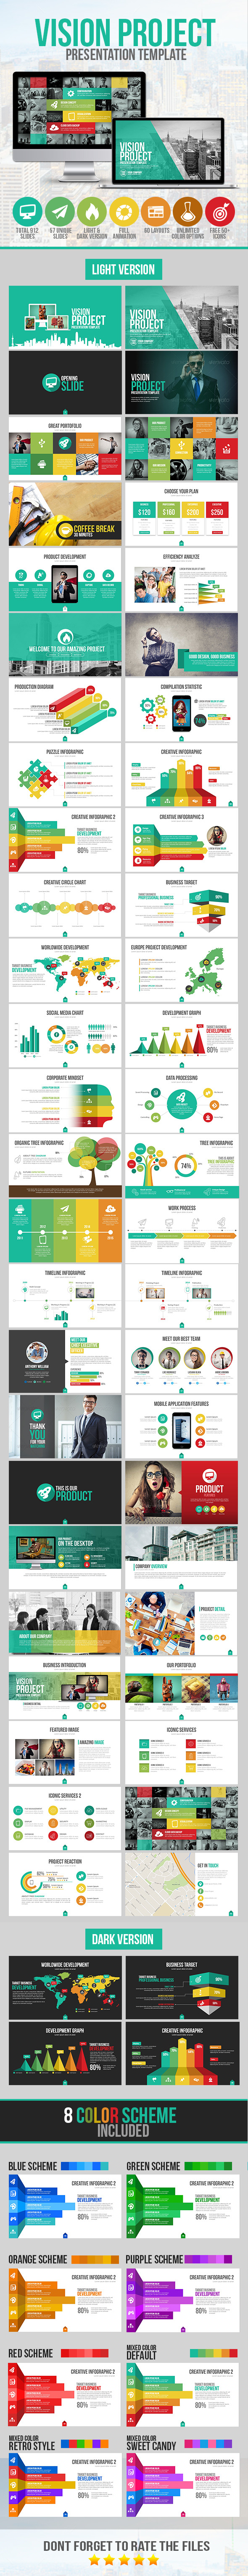 Vision Project Presentation Template